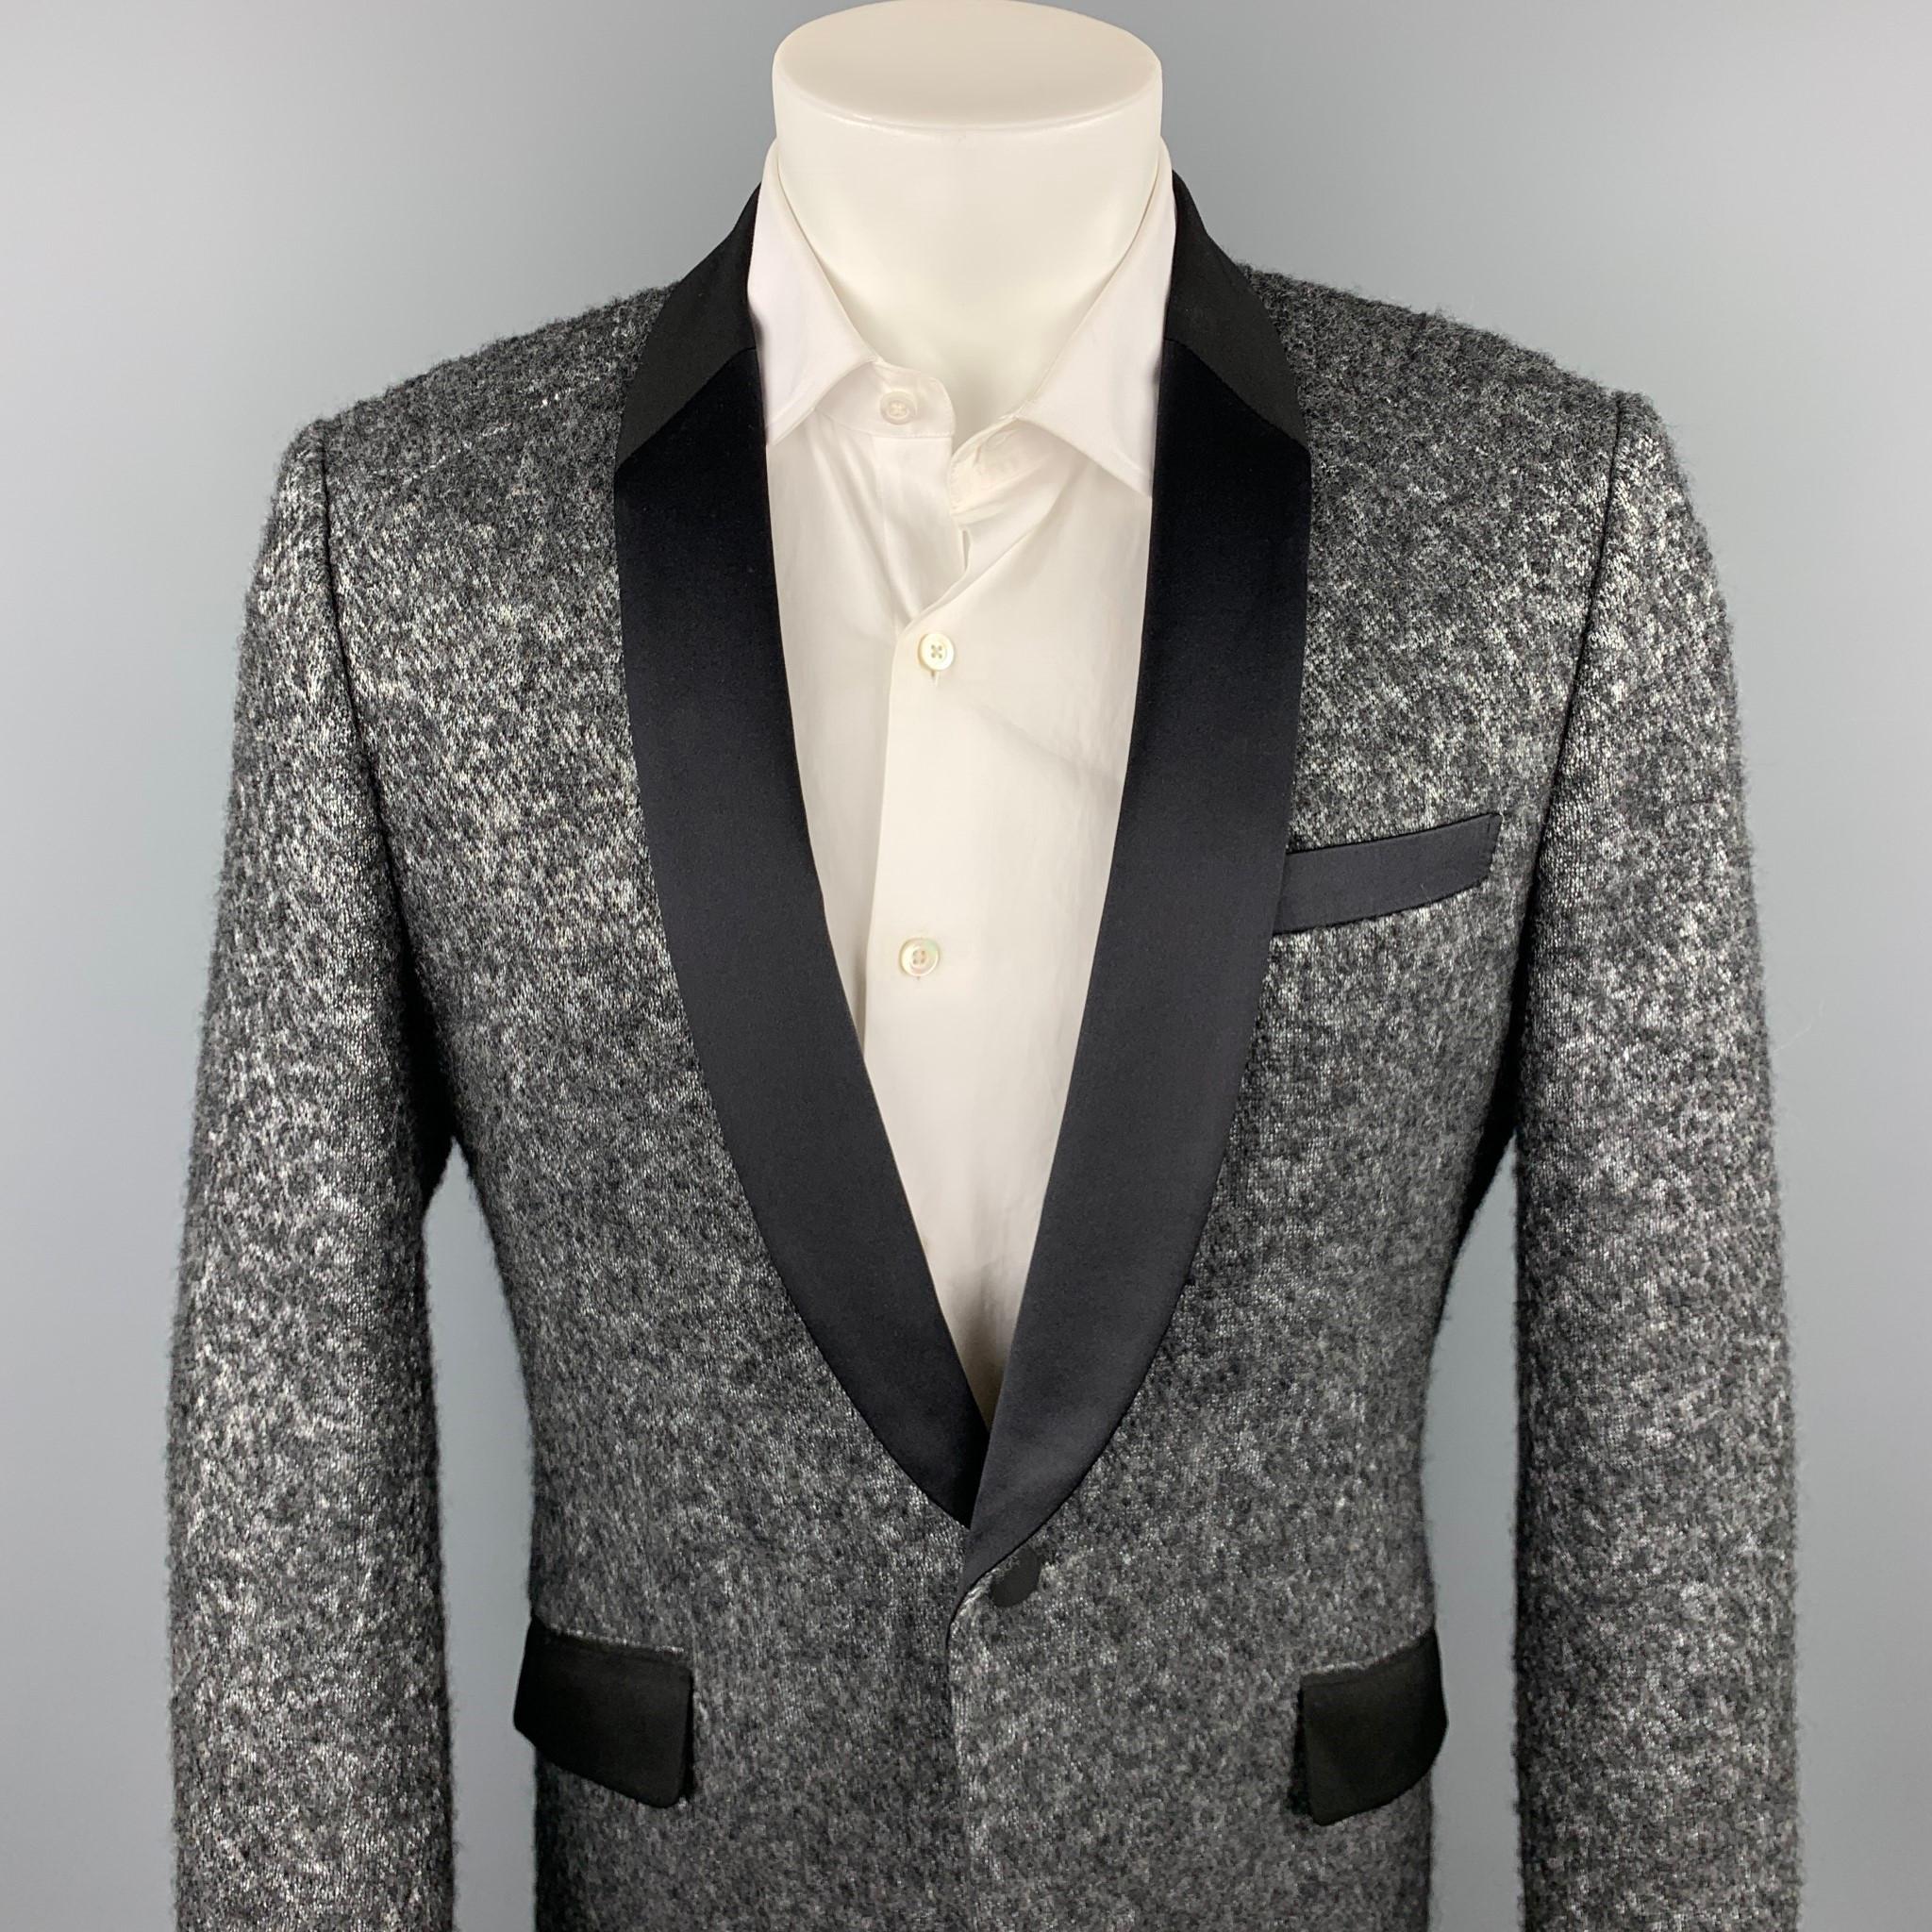 JUNYA WATANABE sport coat comes in silver & black tweed wool blend with a full liner featuring a shawl lapel, flap pockets, and a single button closure. Made in Japan.

Excellent Pre-Owned Condition.
Marked: XL

Measurements:

Shoulder: 18